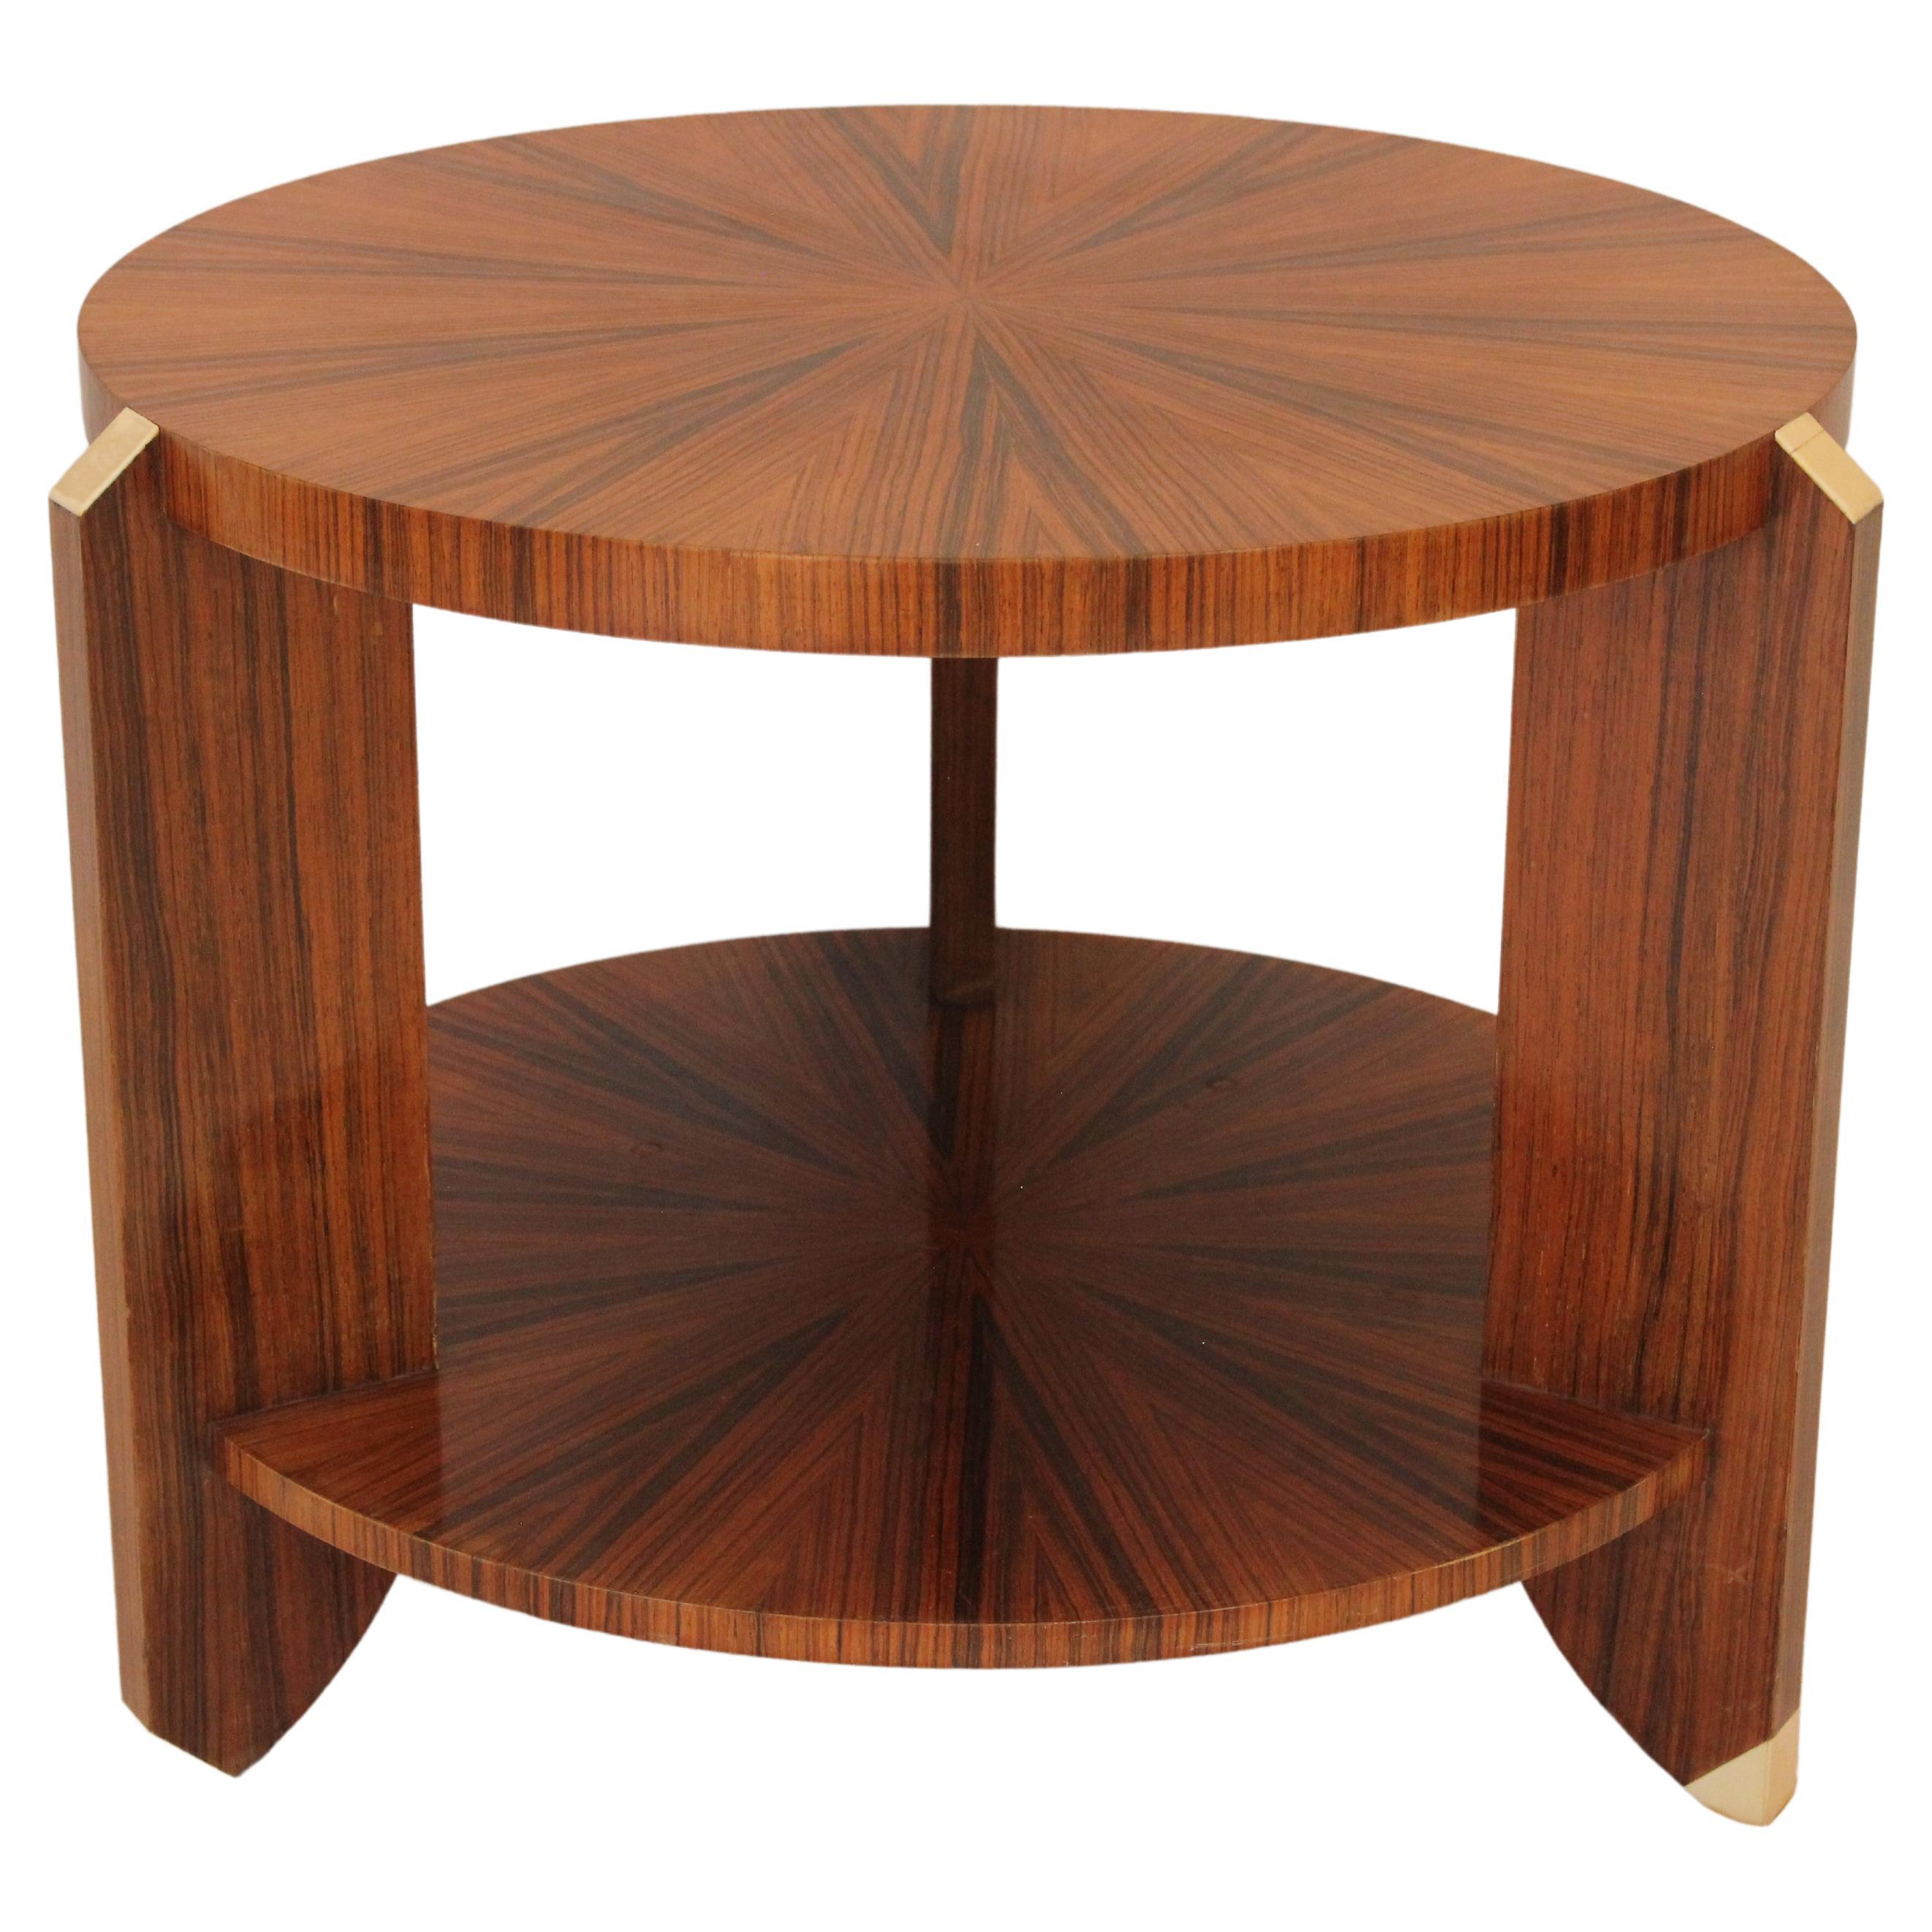 French Art Deco Walnut Starburst Marquetry Moderne Side Table Circa 1930  For Sale